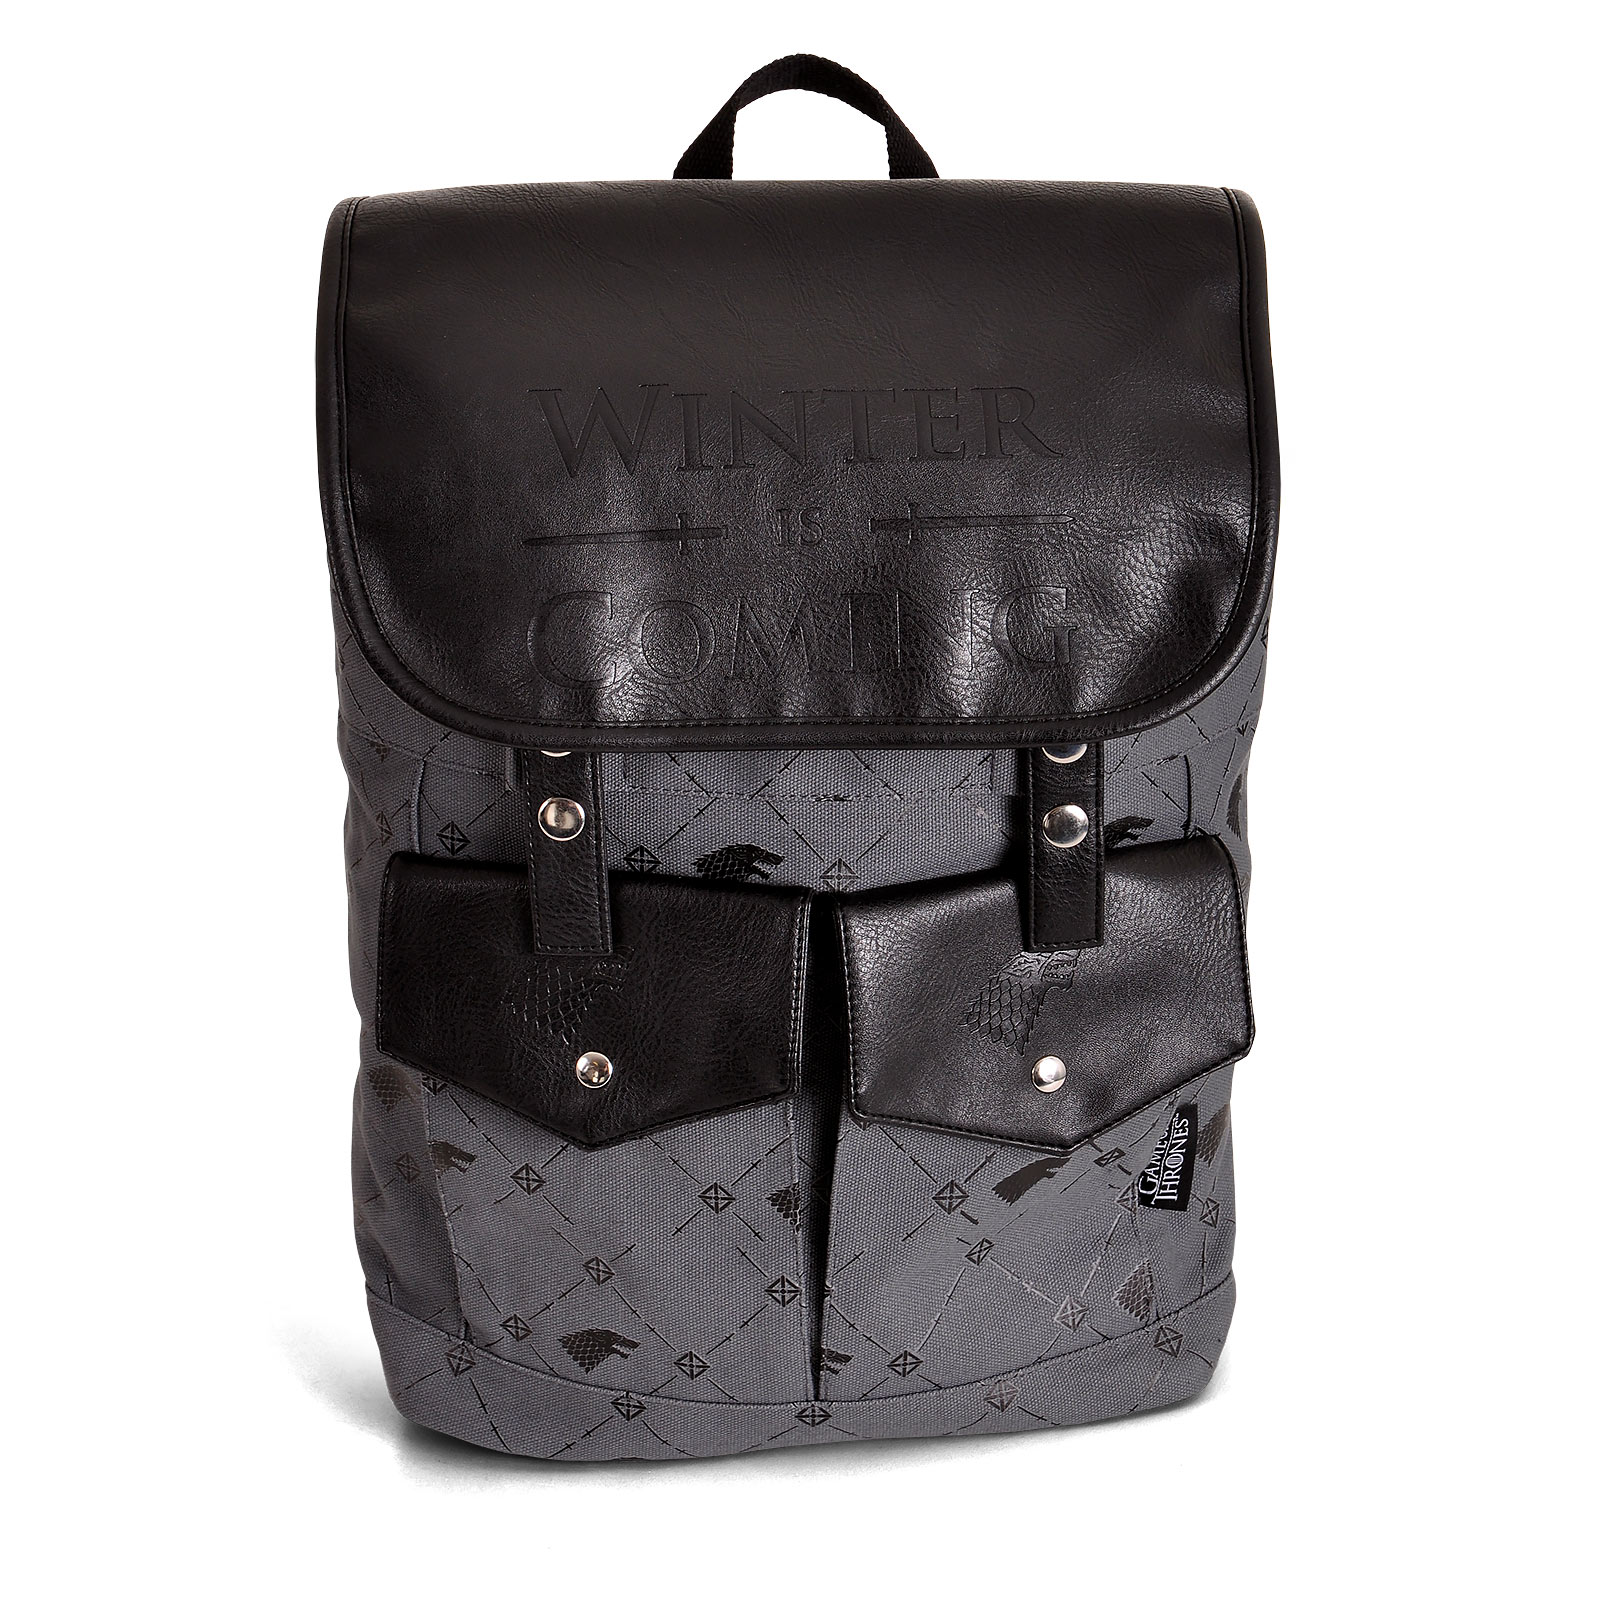 Game of Thrones - Winter is Coming Backpack